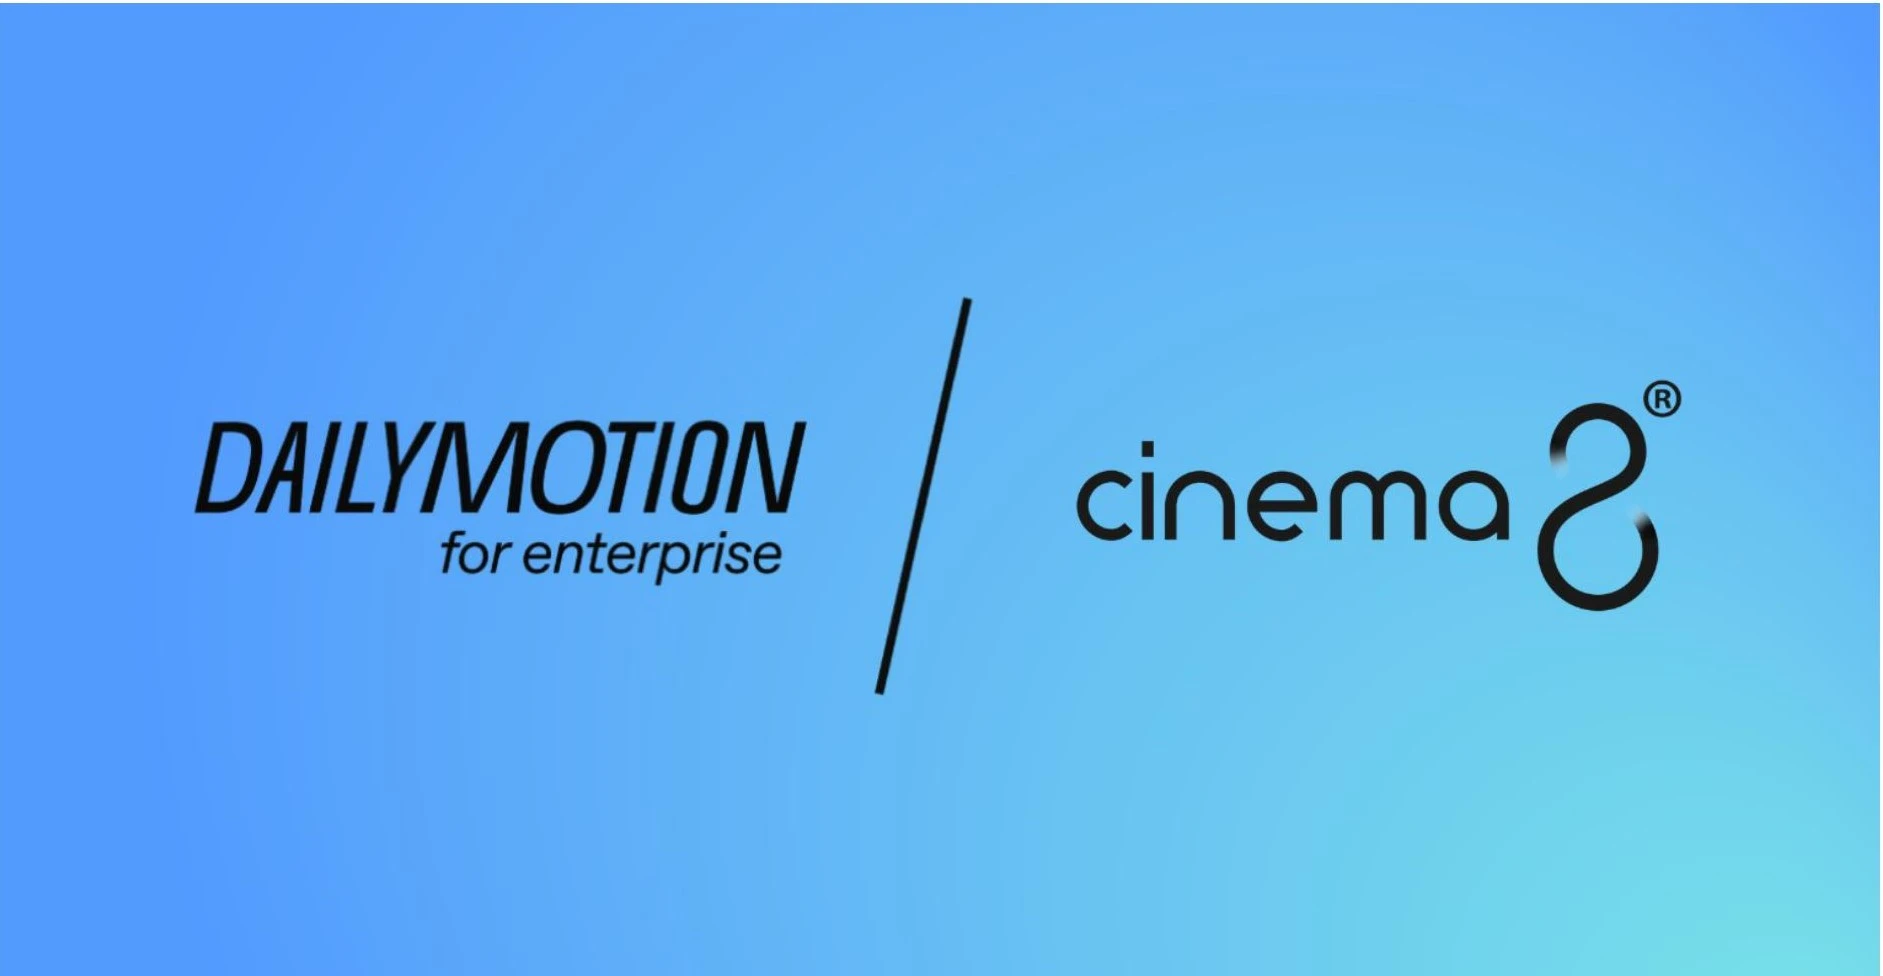 Cinema8 Partners with Dailymotion to Elevate Interactive Video Experiences